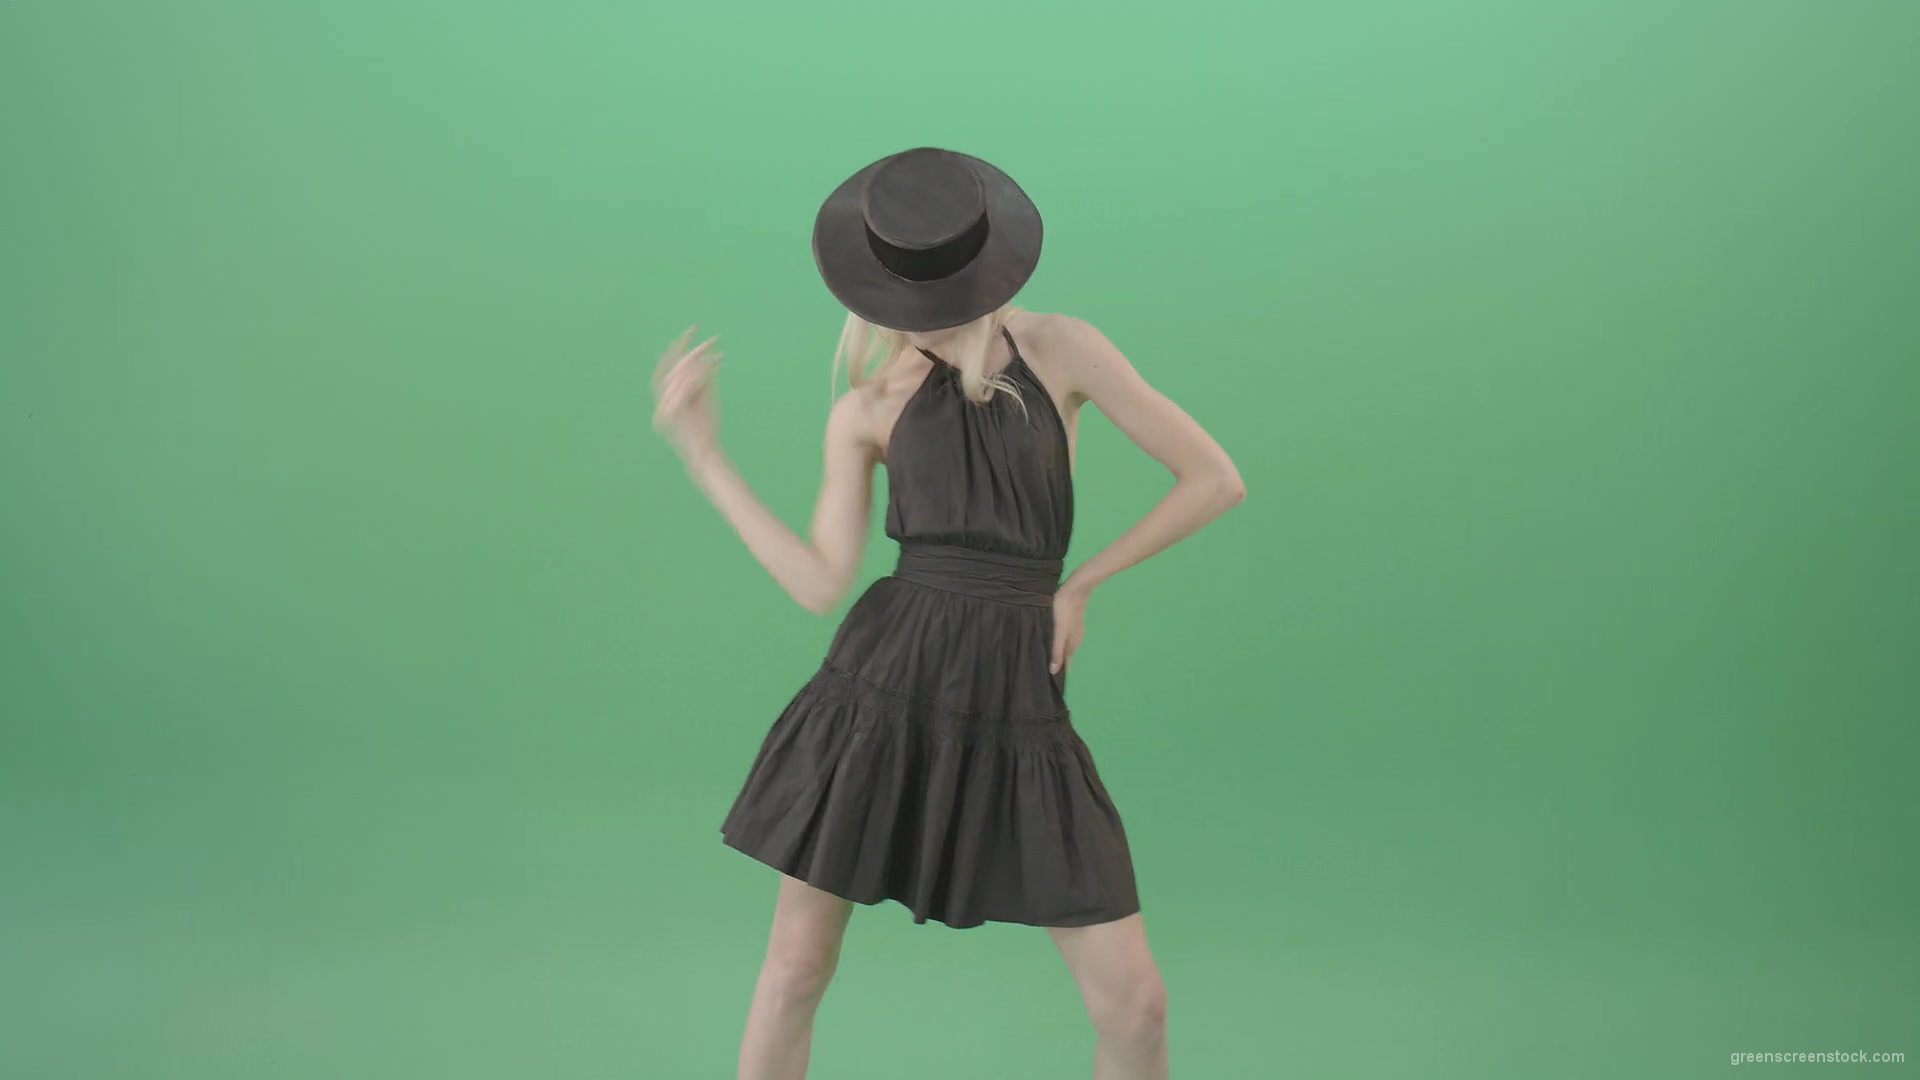 Video-Art-Fashion-Dance-by-Girl-in-black-outlet-and-dark-hat-on-green-screen-Video-Footage-1920_006 Green Screen Stock